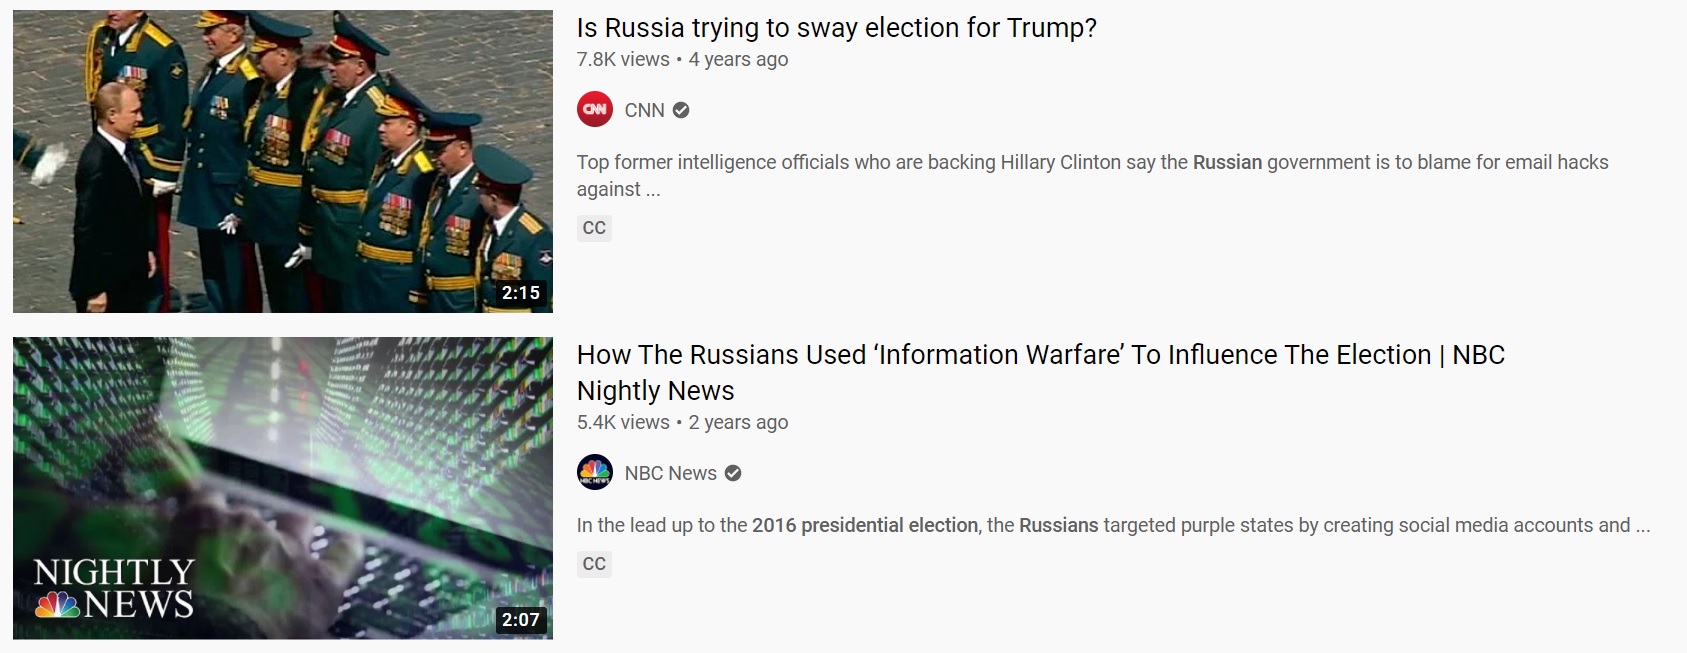 4 Conspiracies YouTube Allows To Flourish While Censoring
Claims Of Election Fraud 2